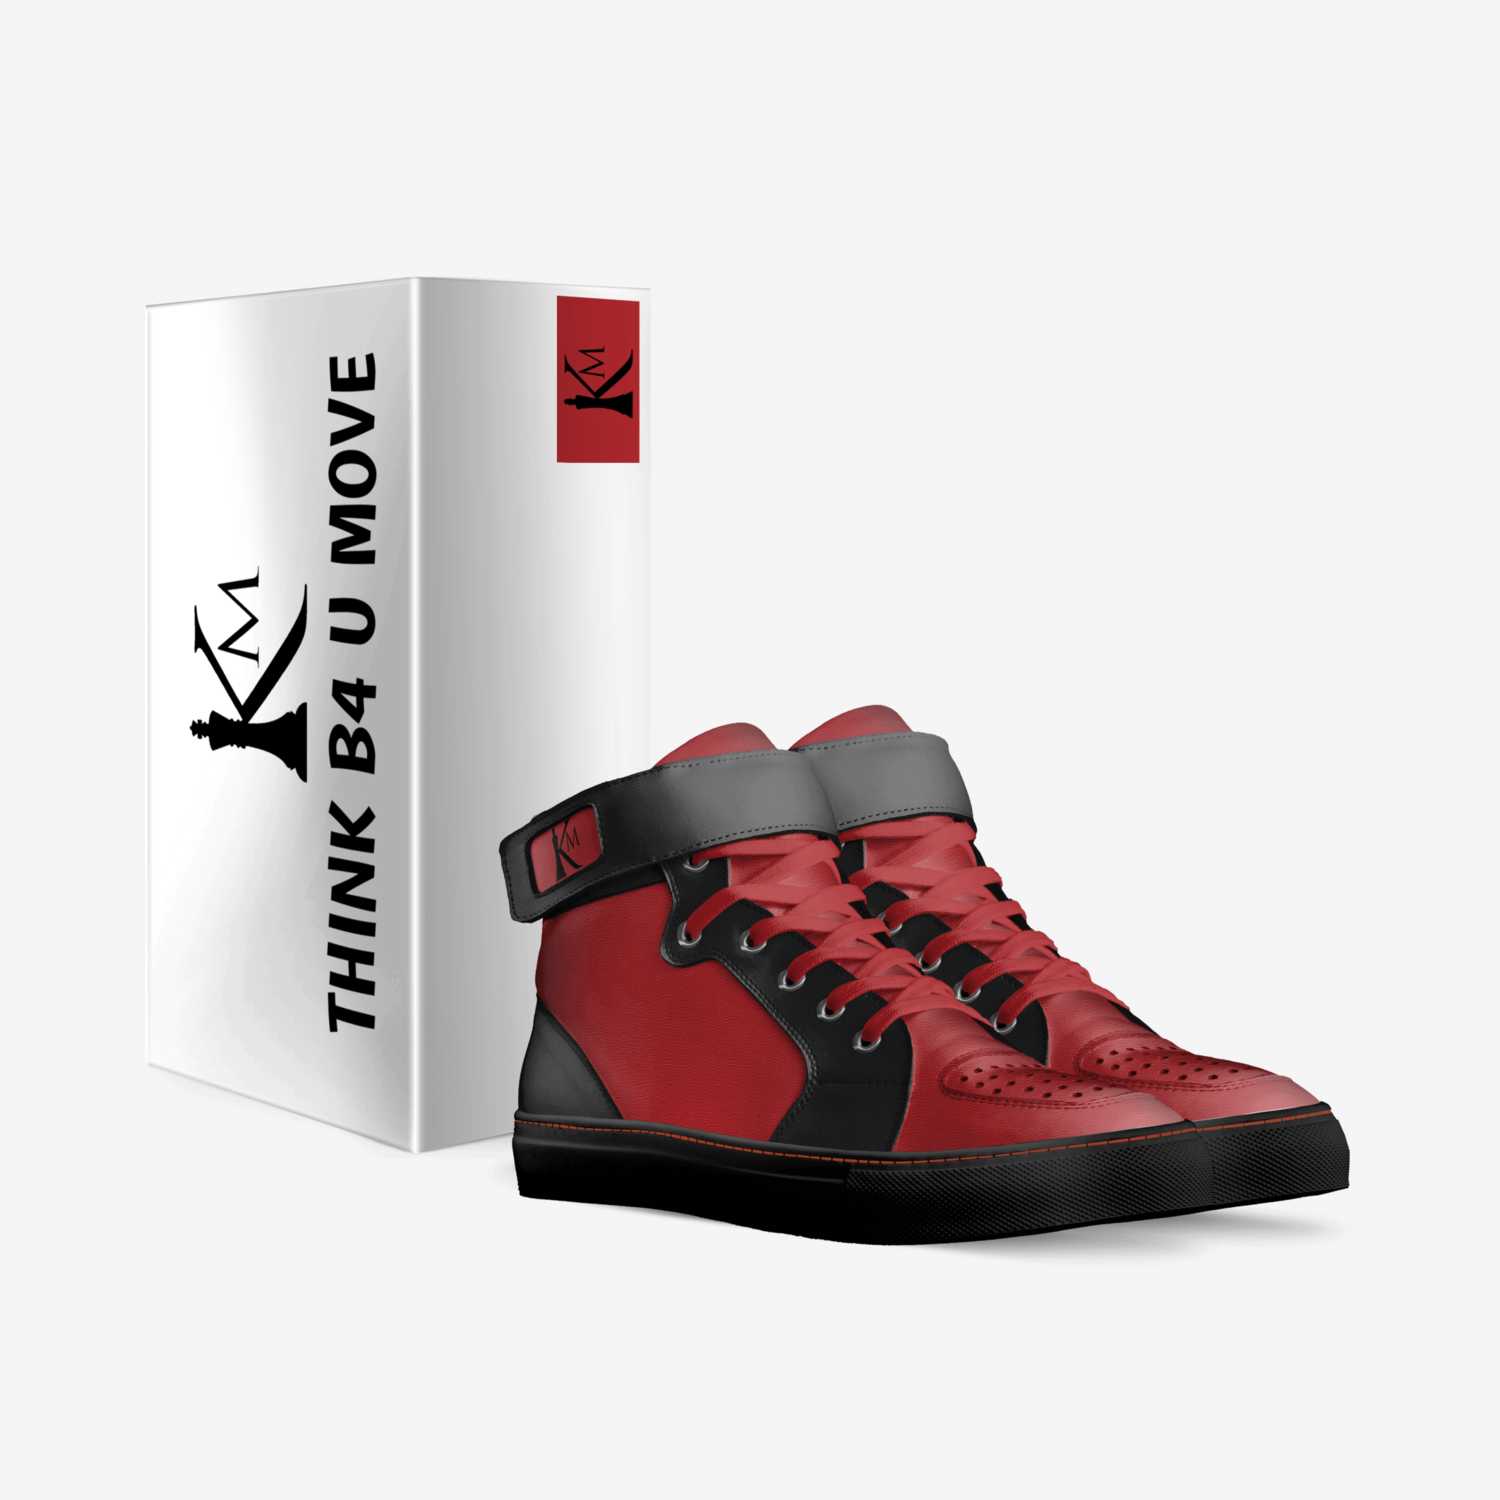 KING MOVES custom made in Italy shoes by Chris Henderson Jr. | Box view